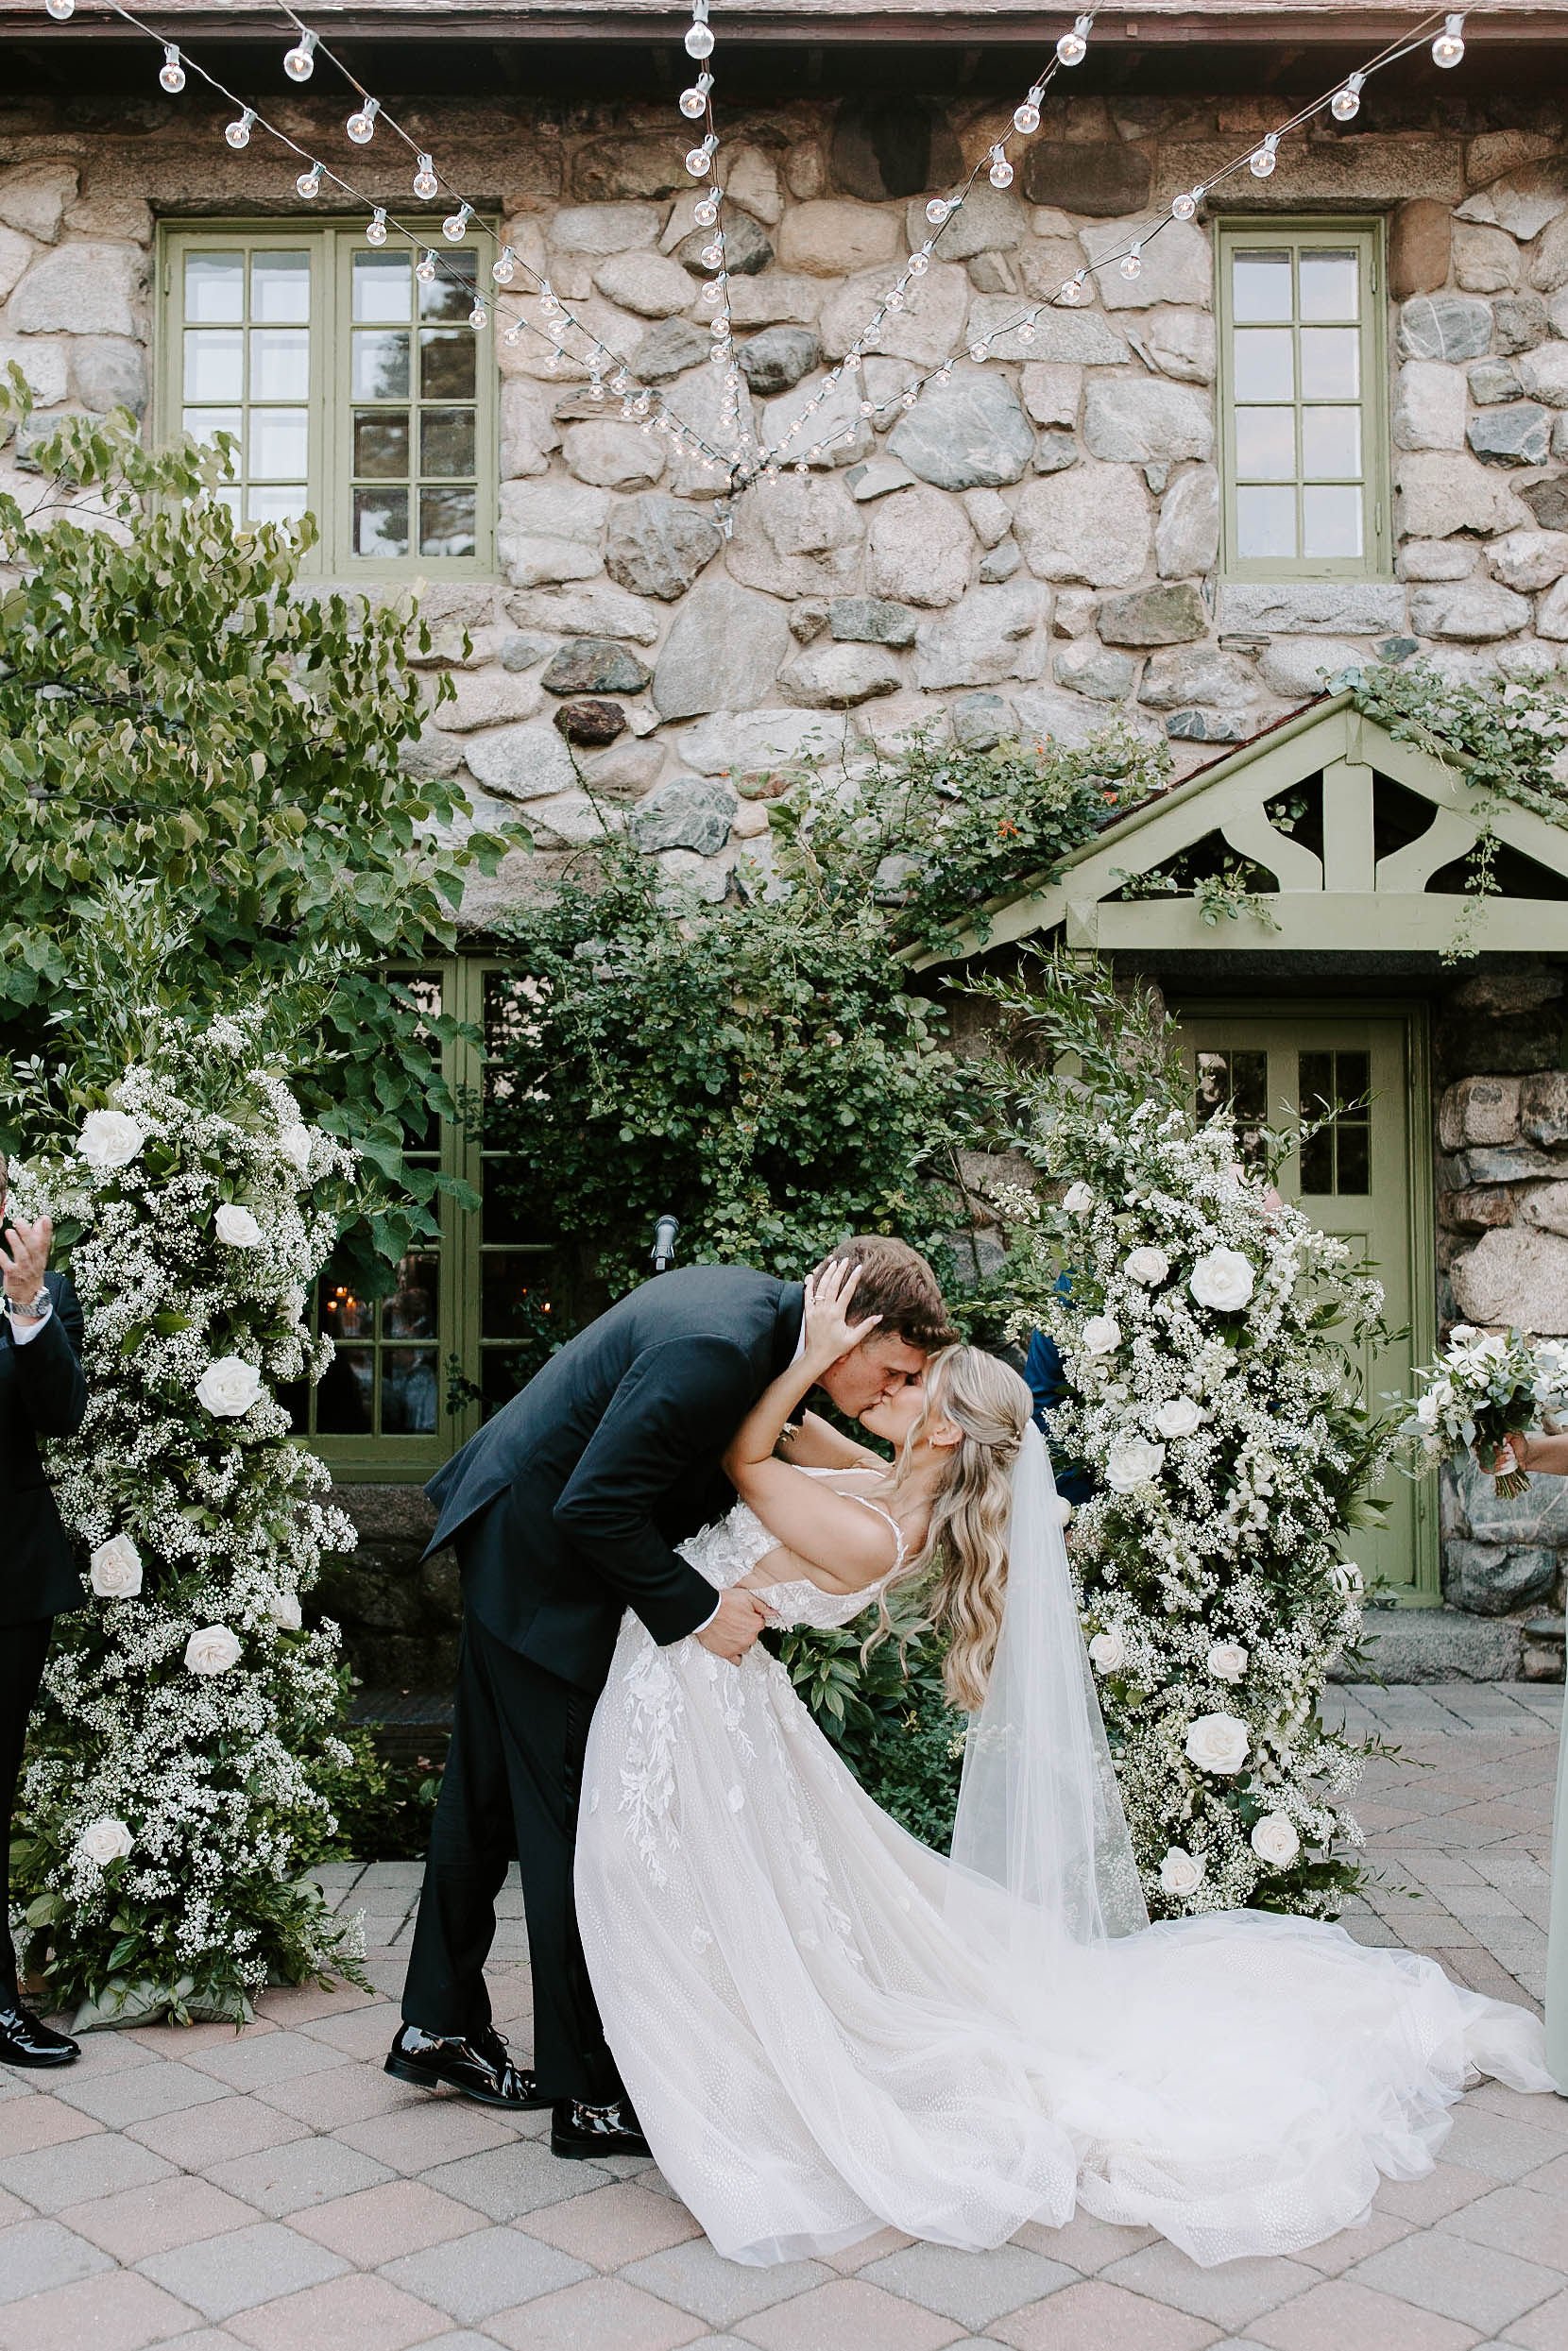 Bride and groom kissing after wedding ceremony in front of beautiful white and green floral arrangements